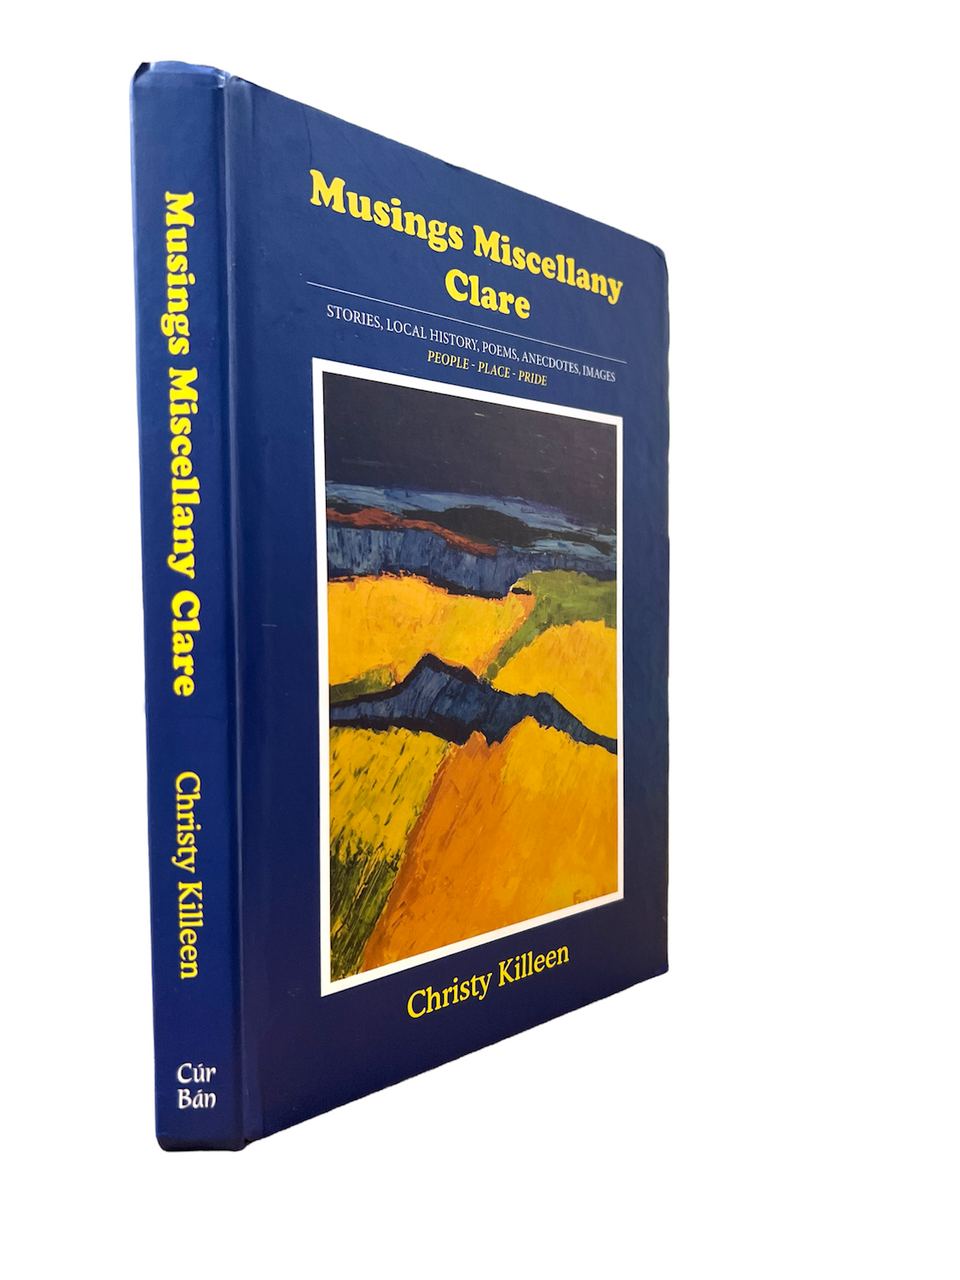 Christy Killeen - Musings Miscellany Clare - HB SIGNED 2021